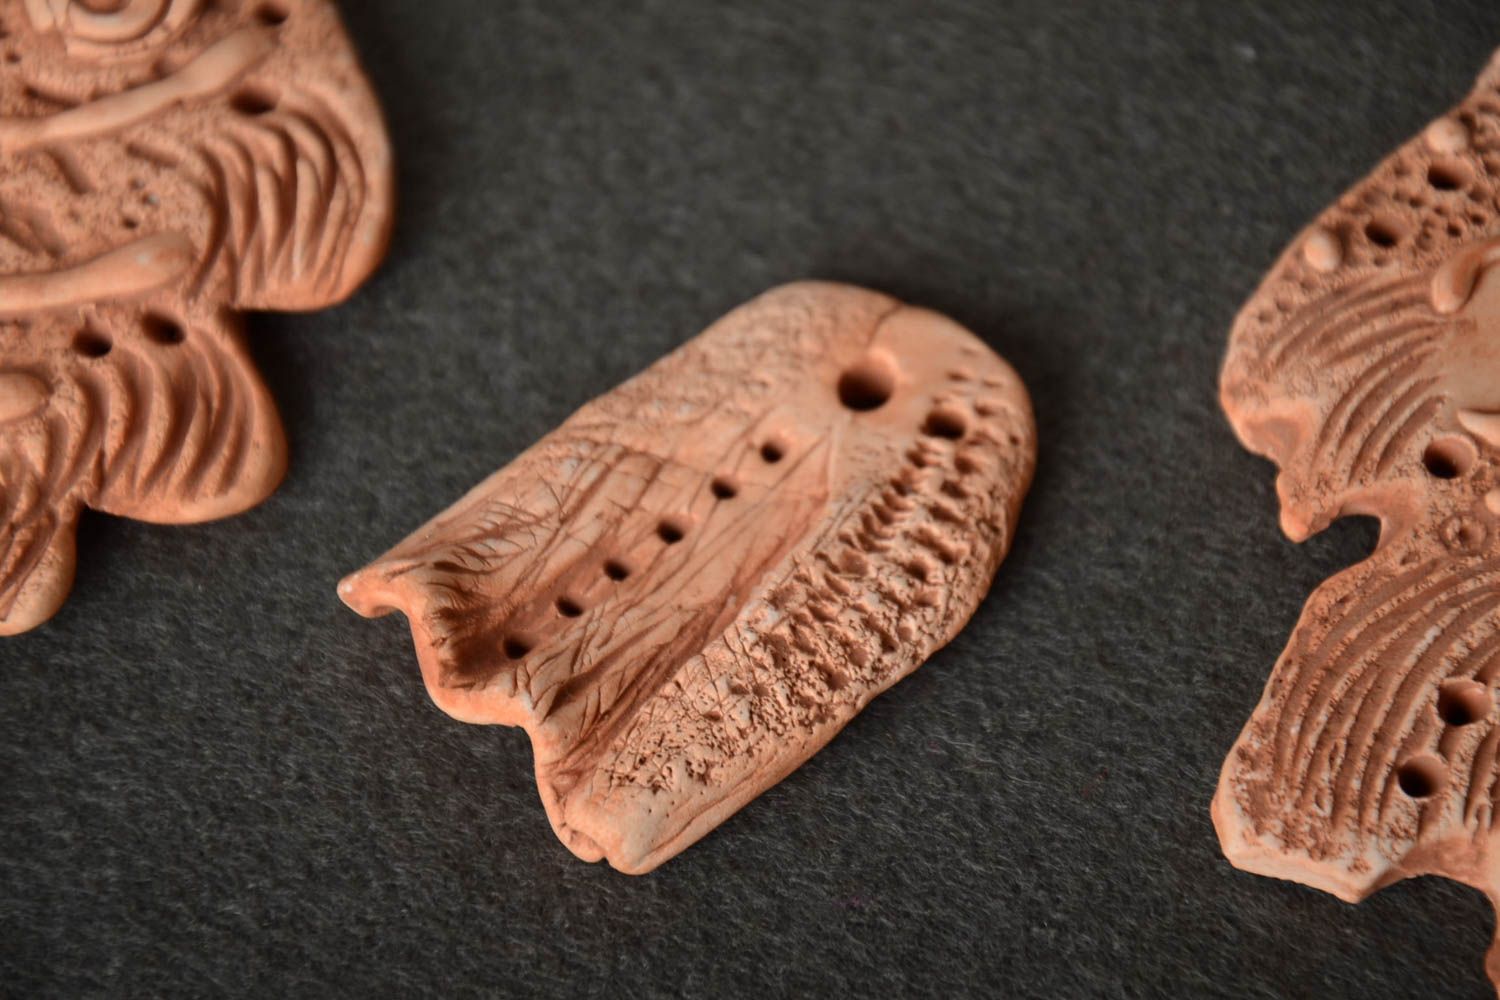 Homemade decorative ceramic element with perforation for pendant necklace making photo 1